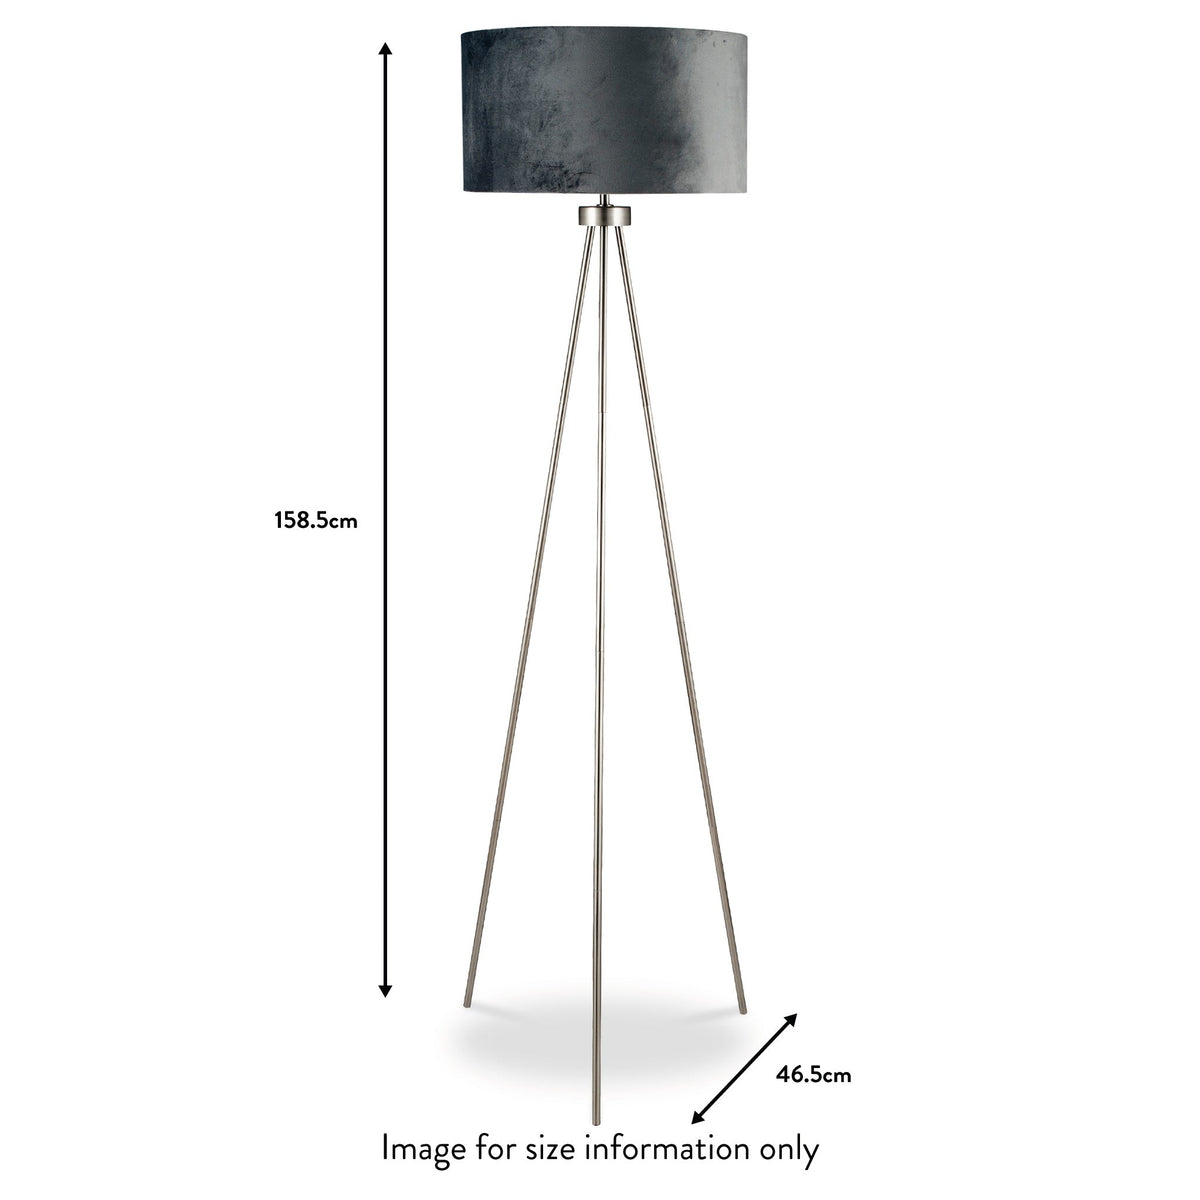 Houston Brushed Silver Tripod Floor Lamp dimensions